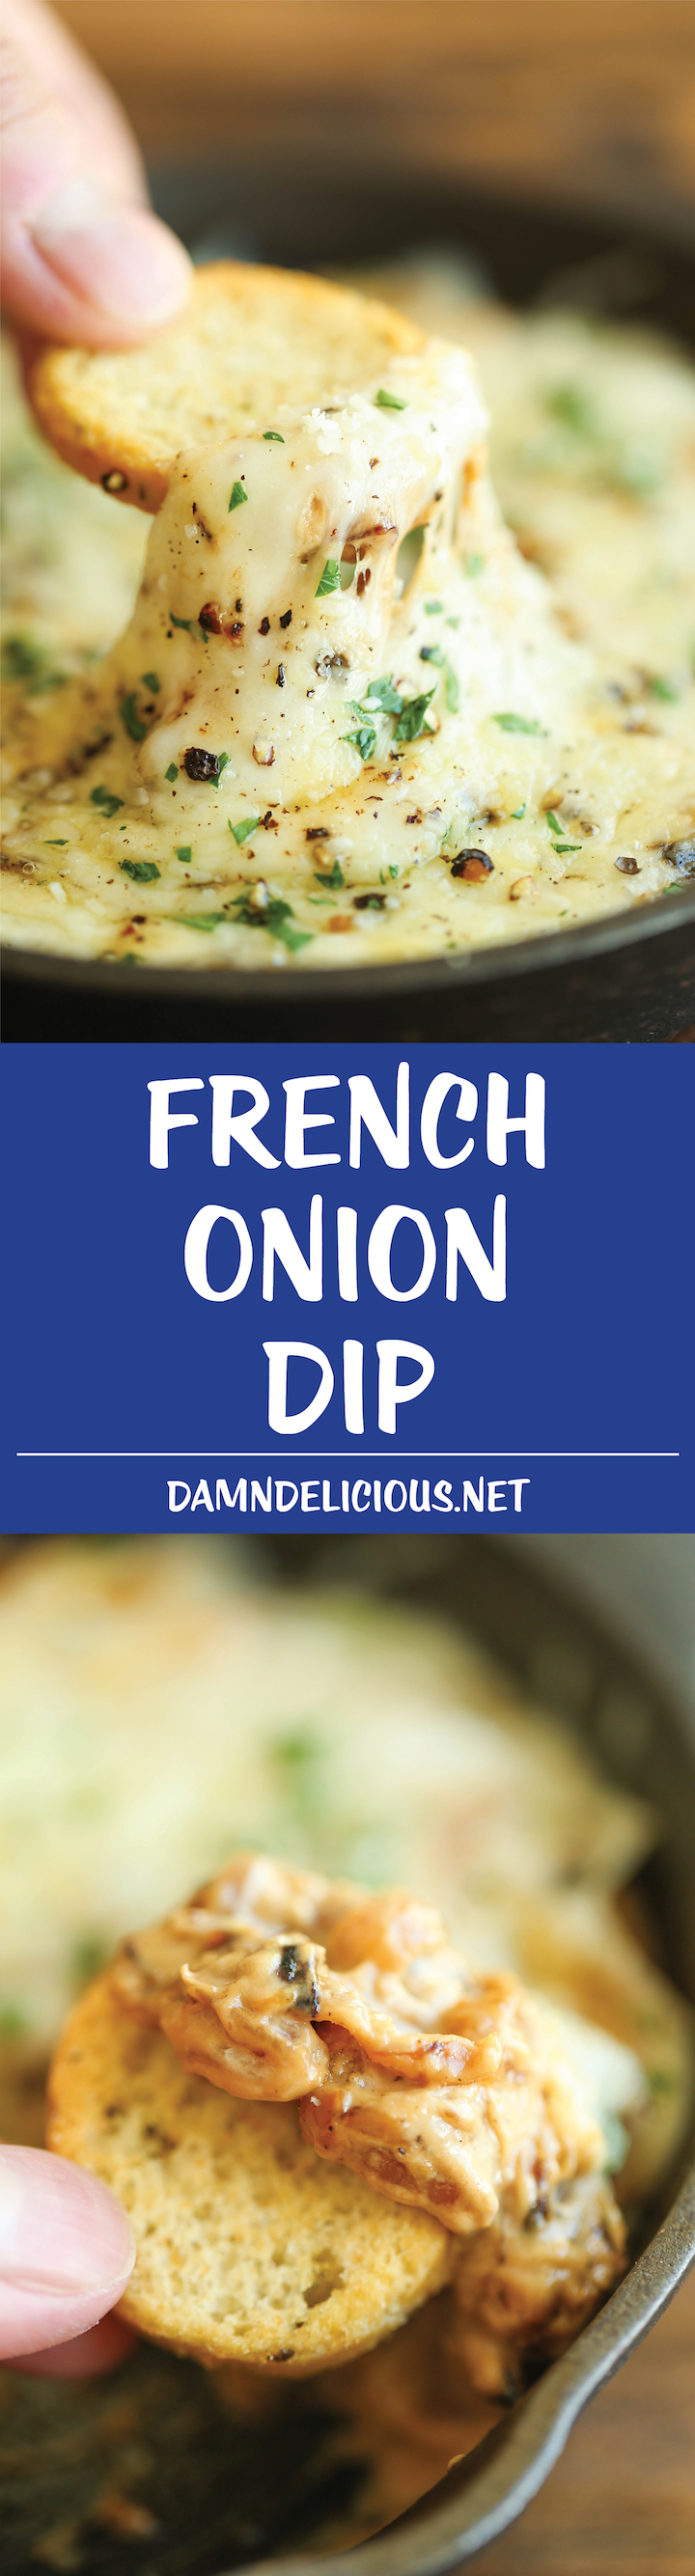 ​French Onion Dip - Everyone's favorite French onion soup is transformed into the cheesiest, creamiest dip of all time. One bite and you'll be hooked!